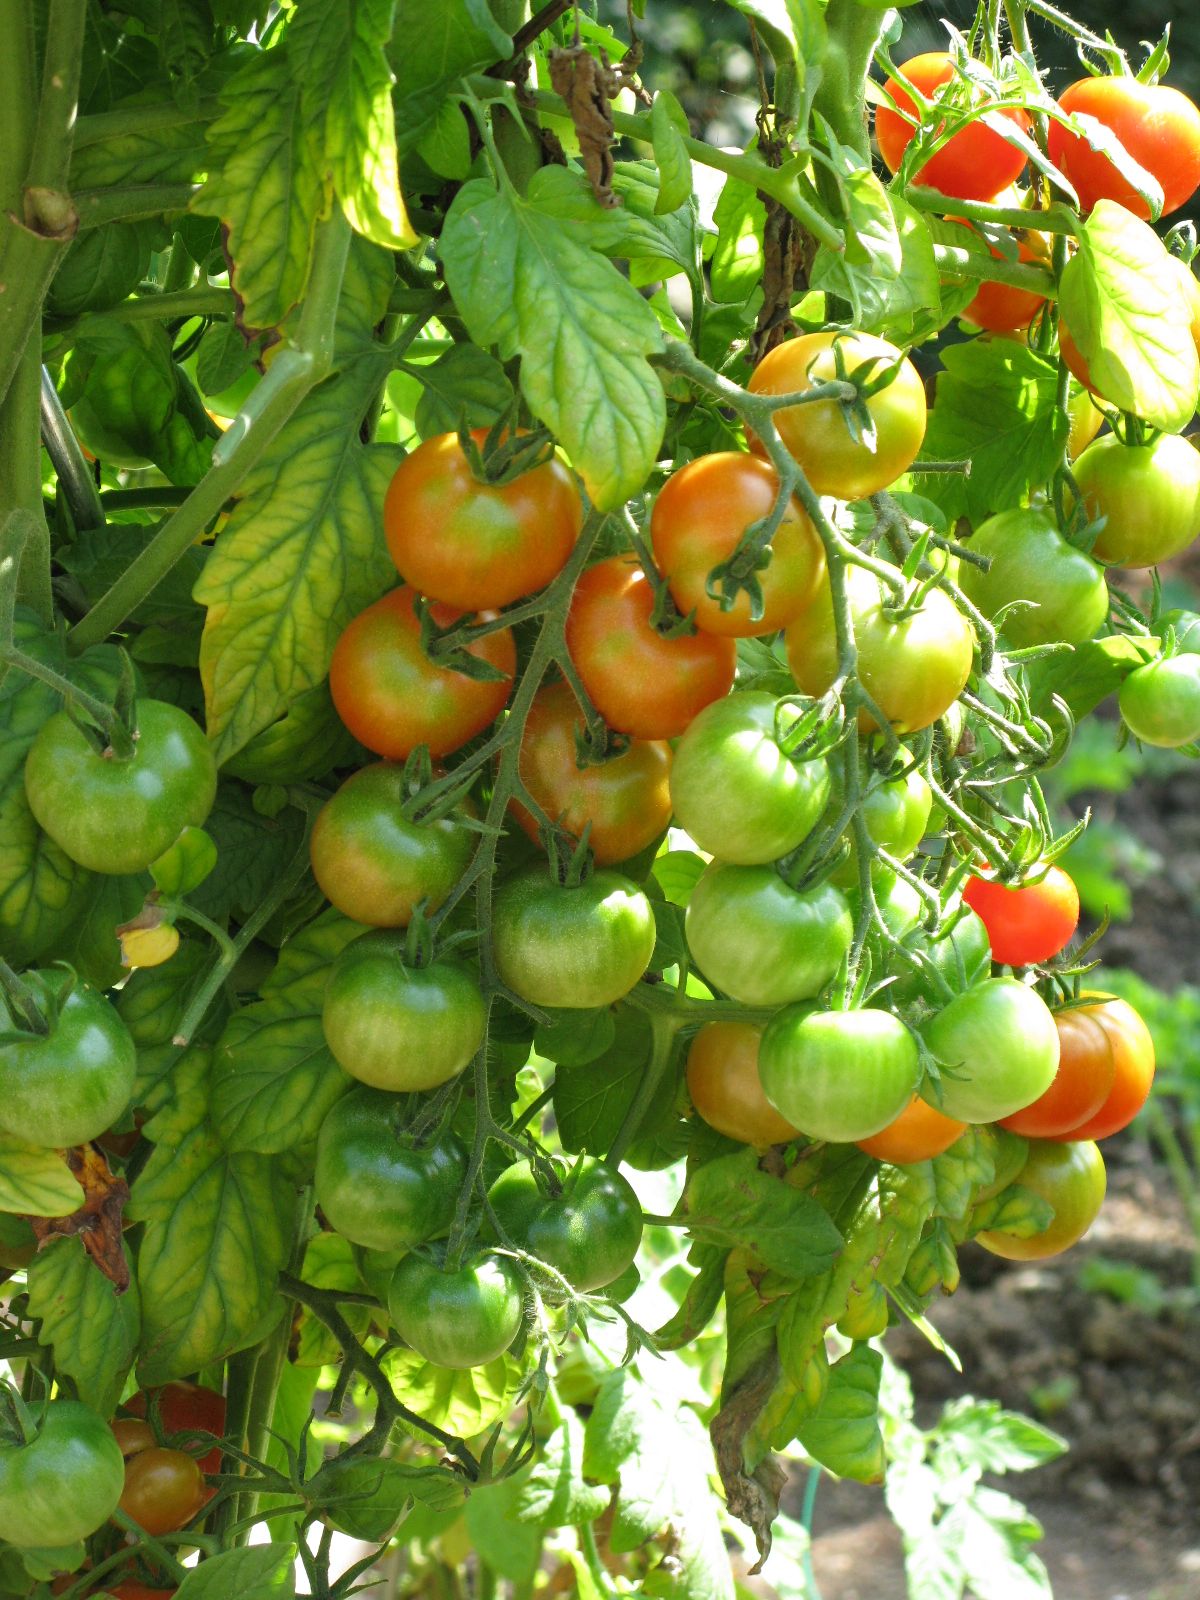 Bunches of Cherry Tomatoes from one plant | Vegetable Plants ...